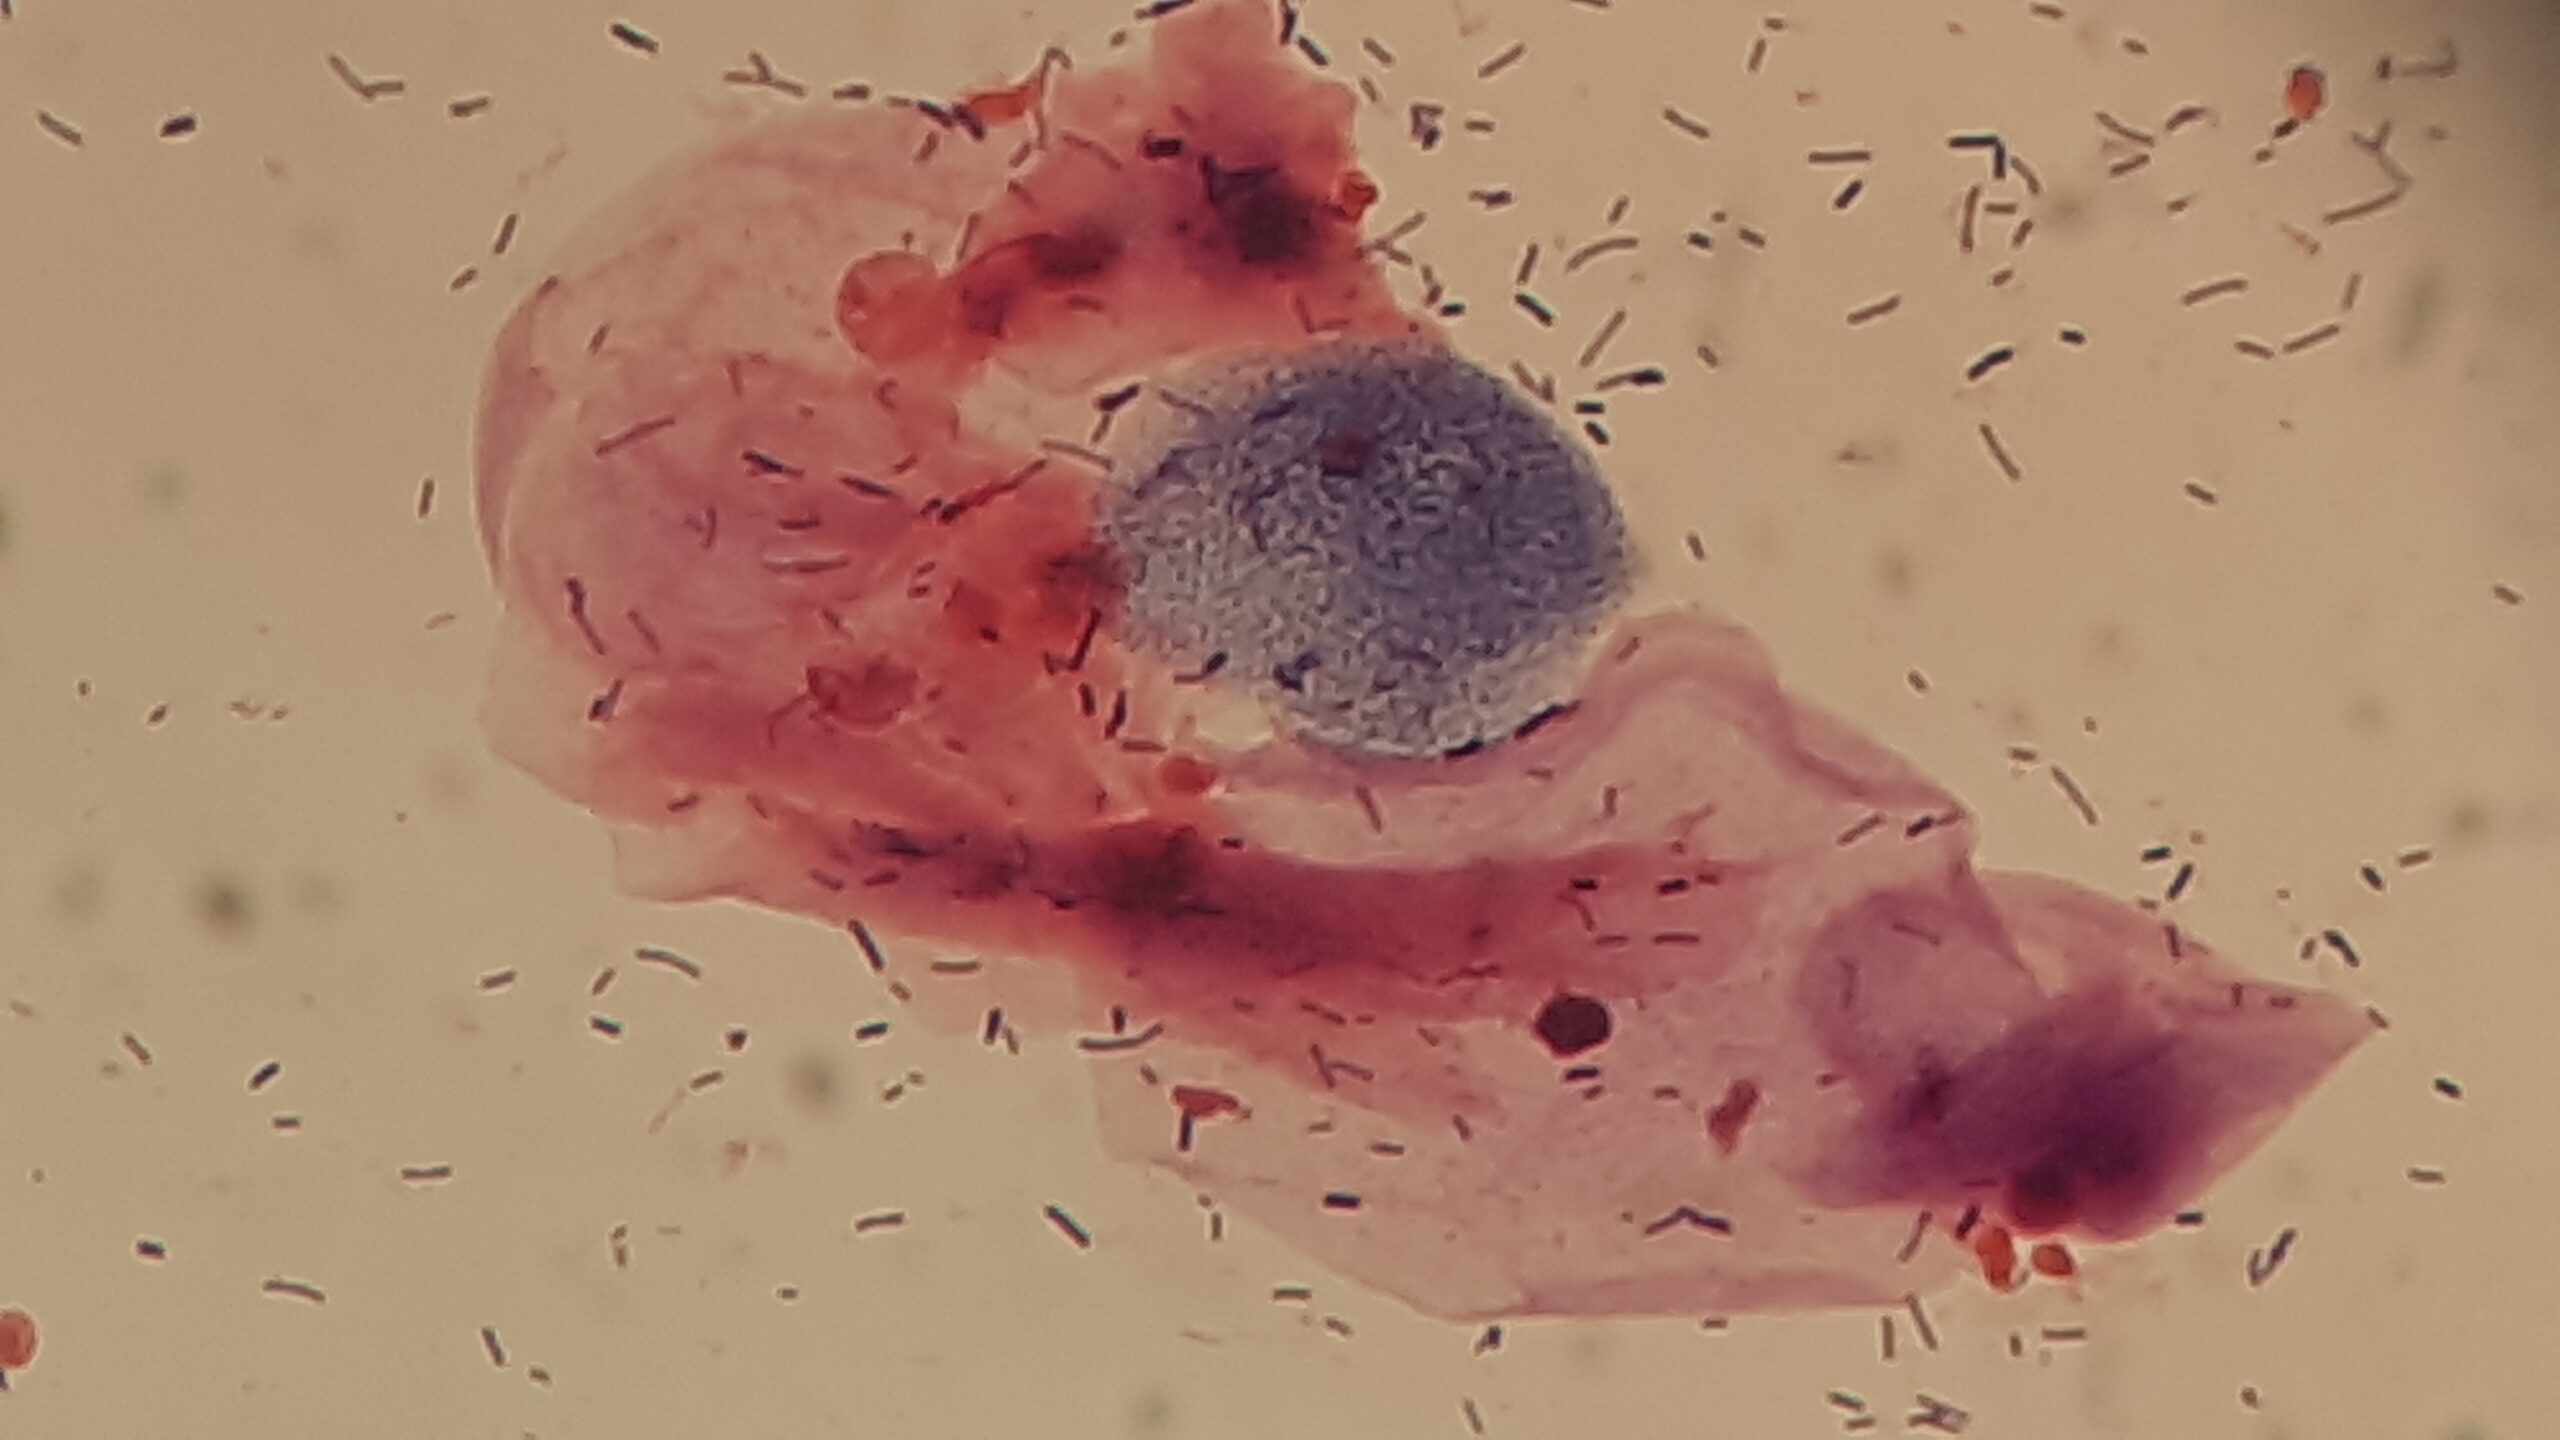 Suspected Bacterial Vaginosis Vaginal Swab in Gram Staining Microscopy at a Magnification of 4000X